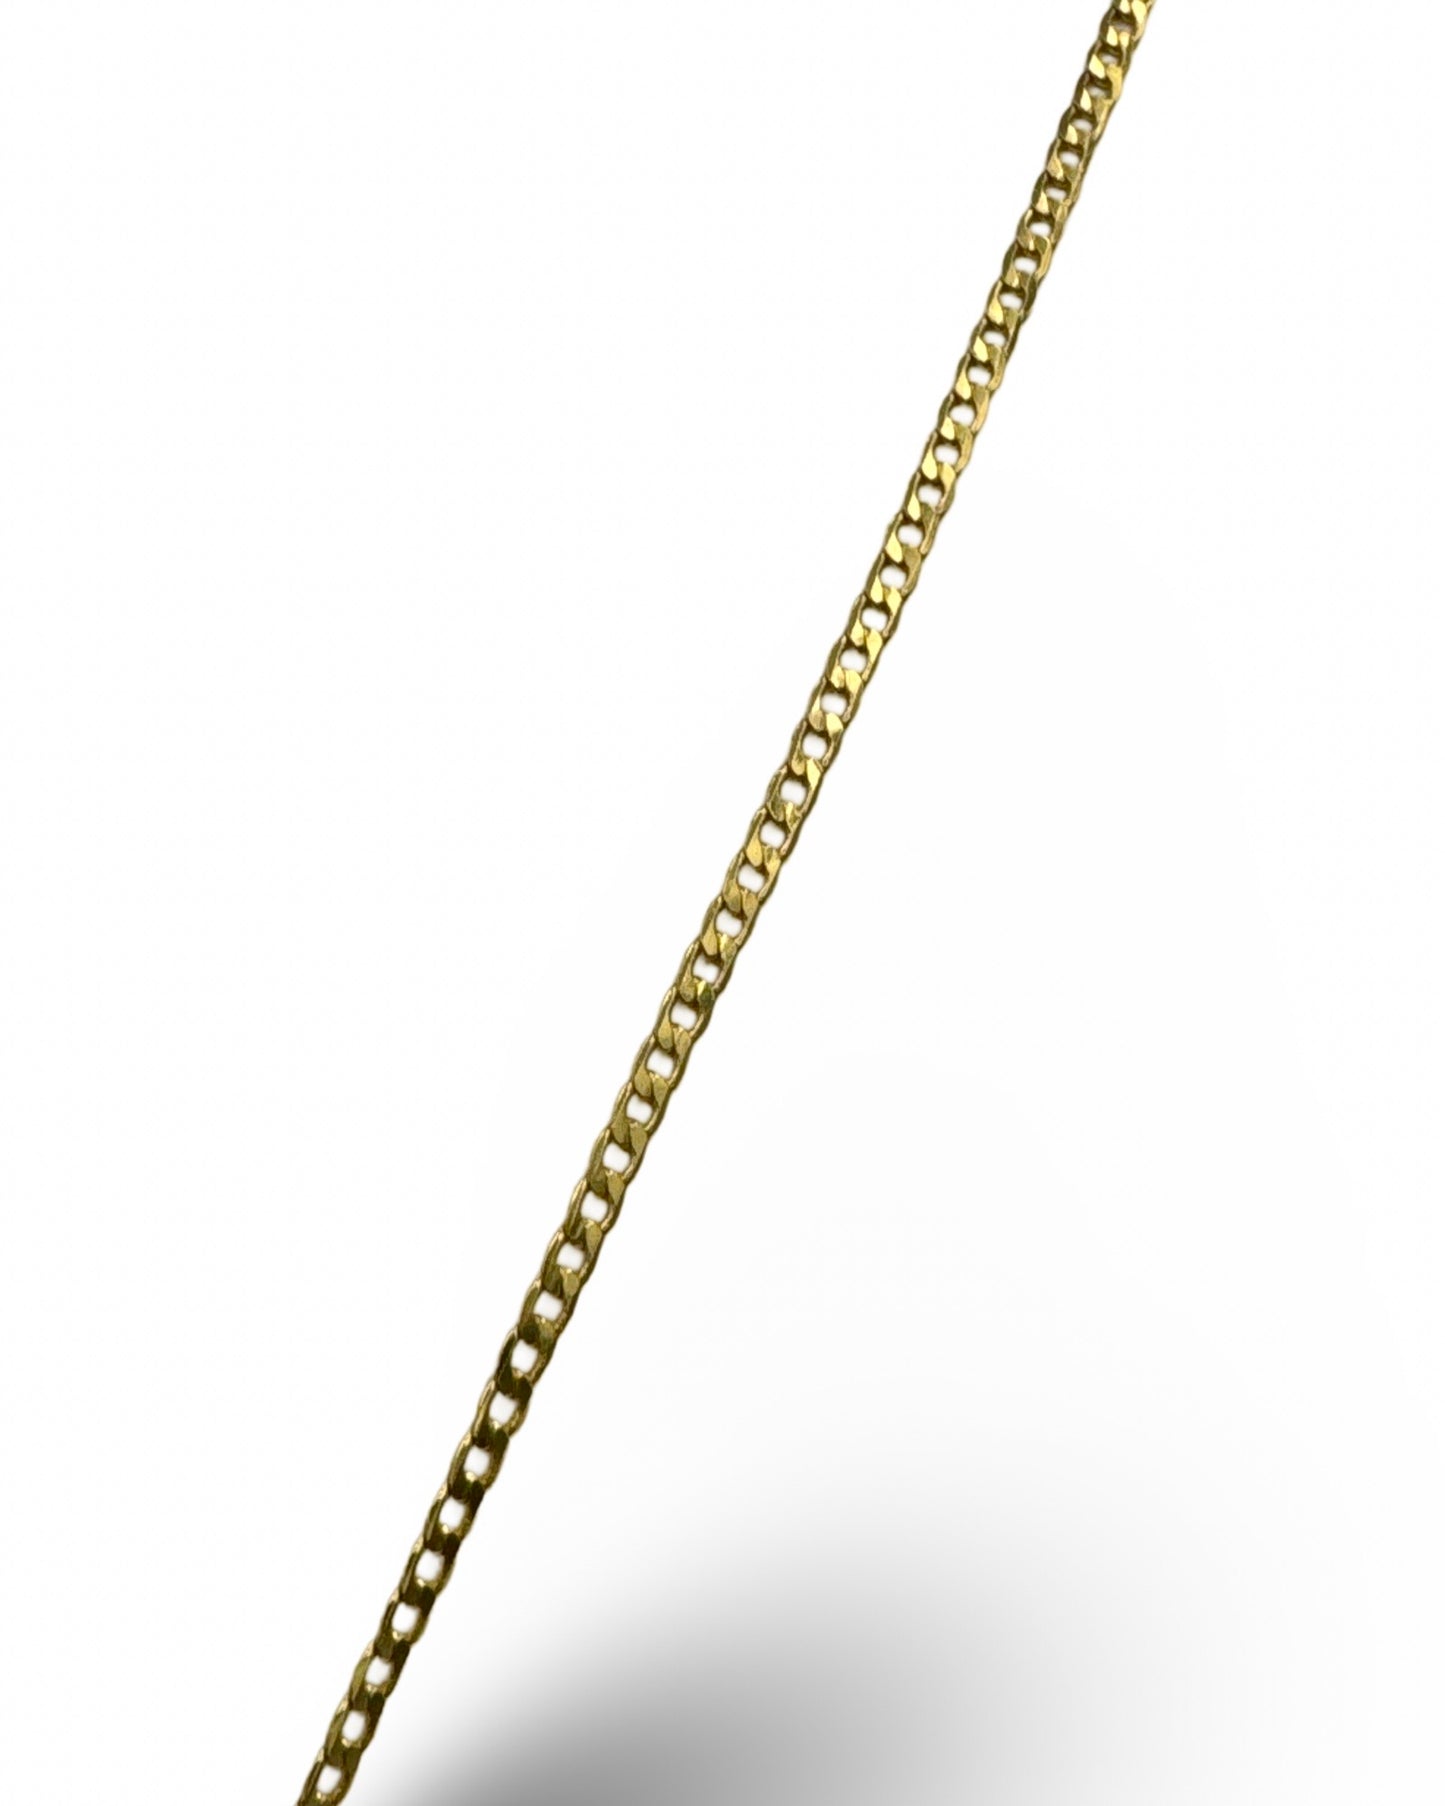 Lucky 11:11 Chain | Gold Filled